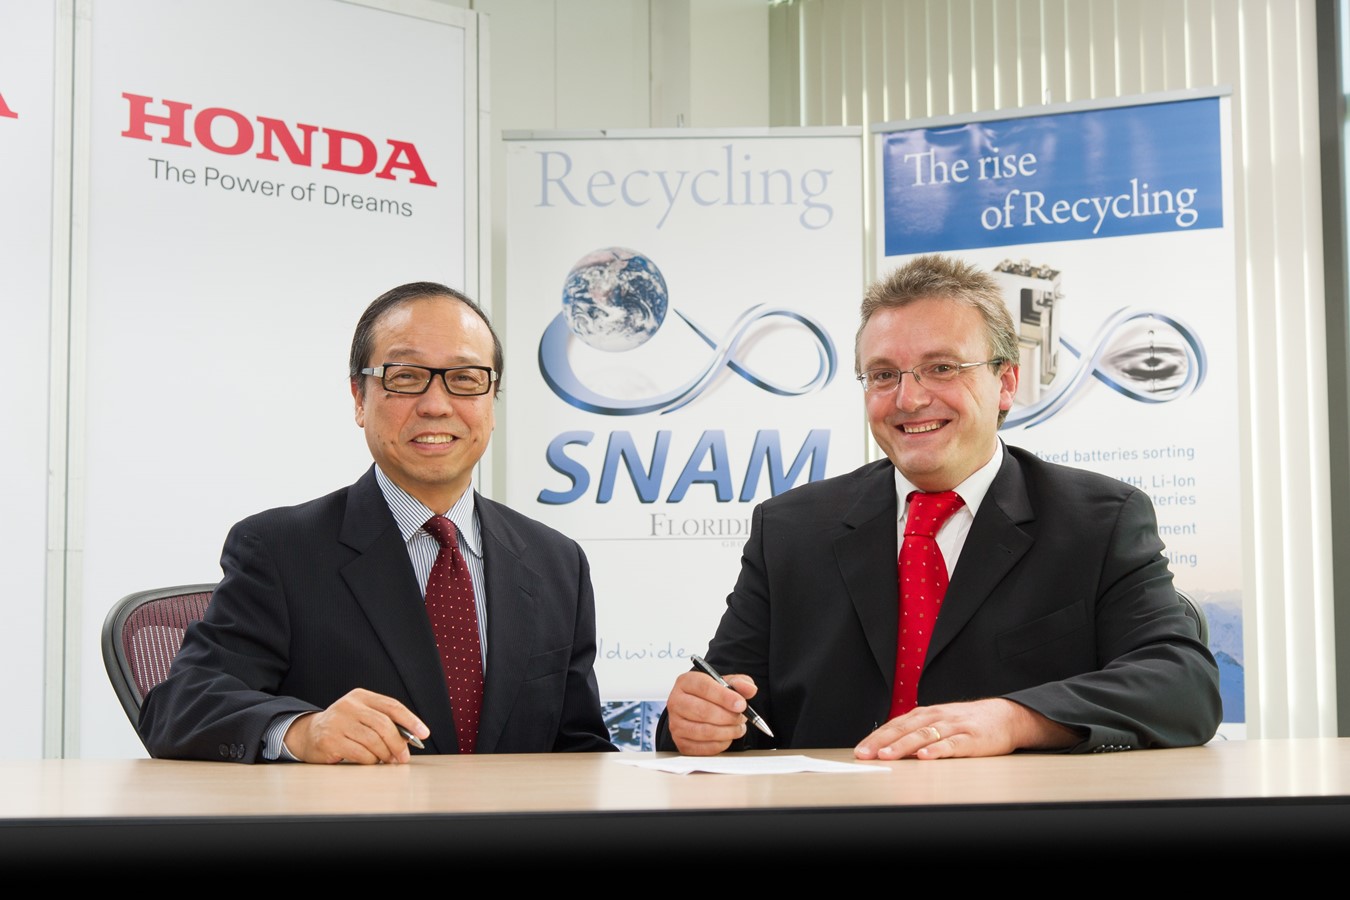 Honda signs agreement with SNAM for recycling of batteries from hybrid vehicles in Europe